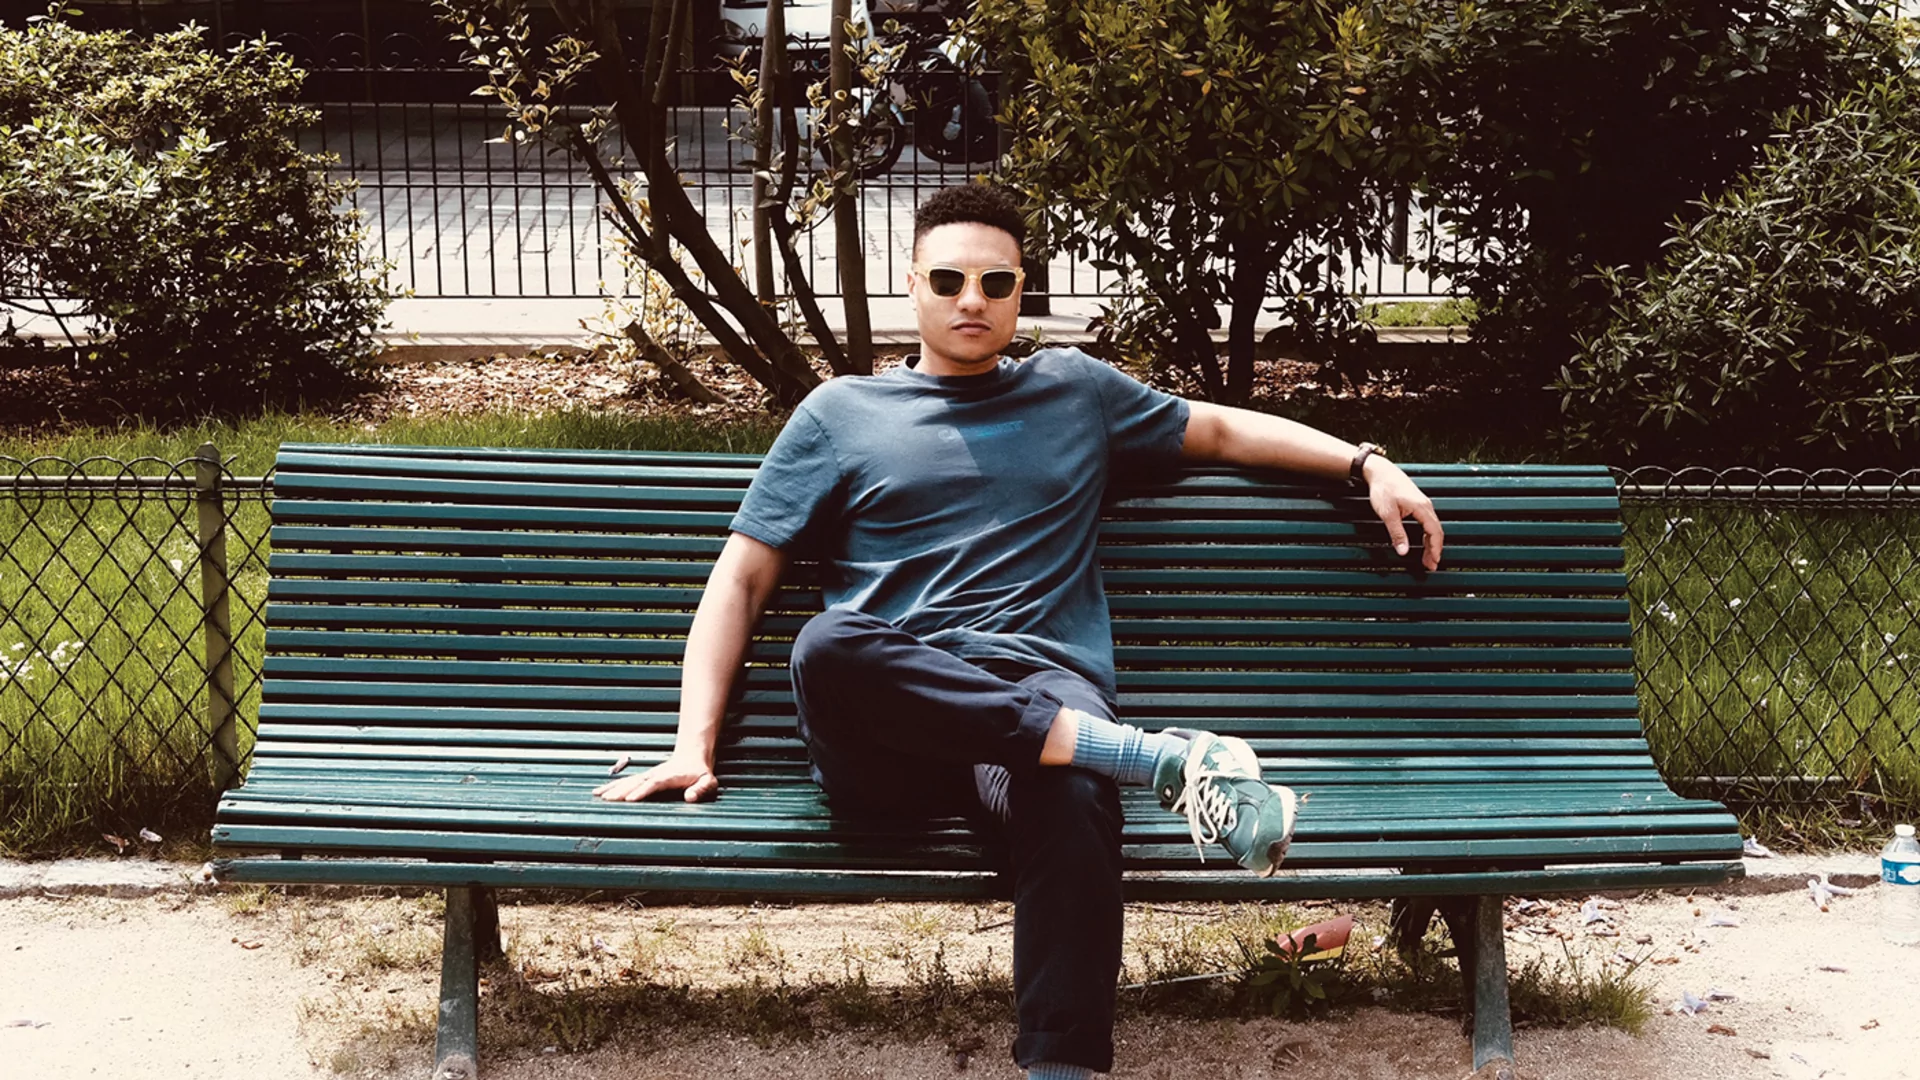 Groovy D sitting on a green park bench